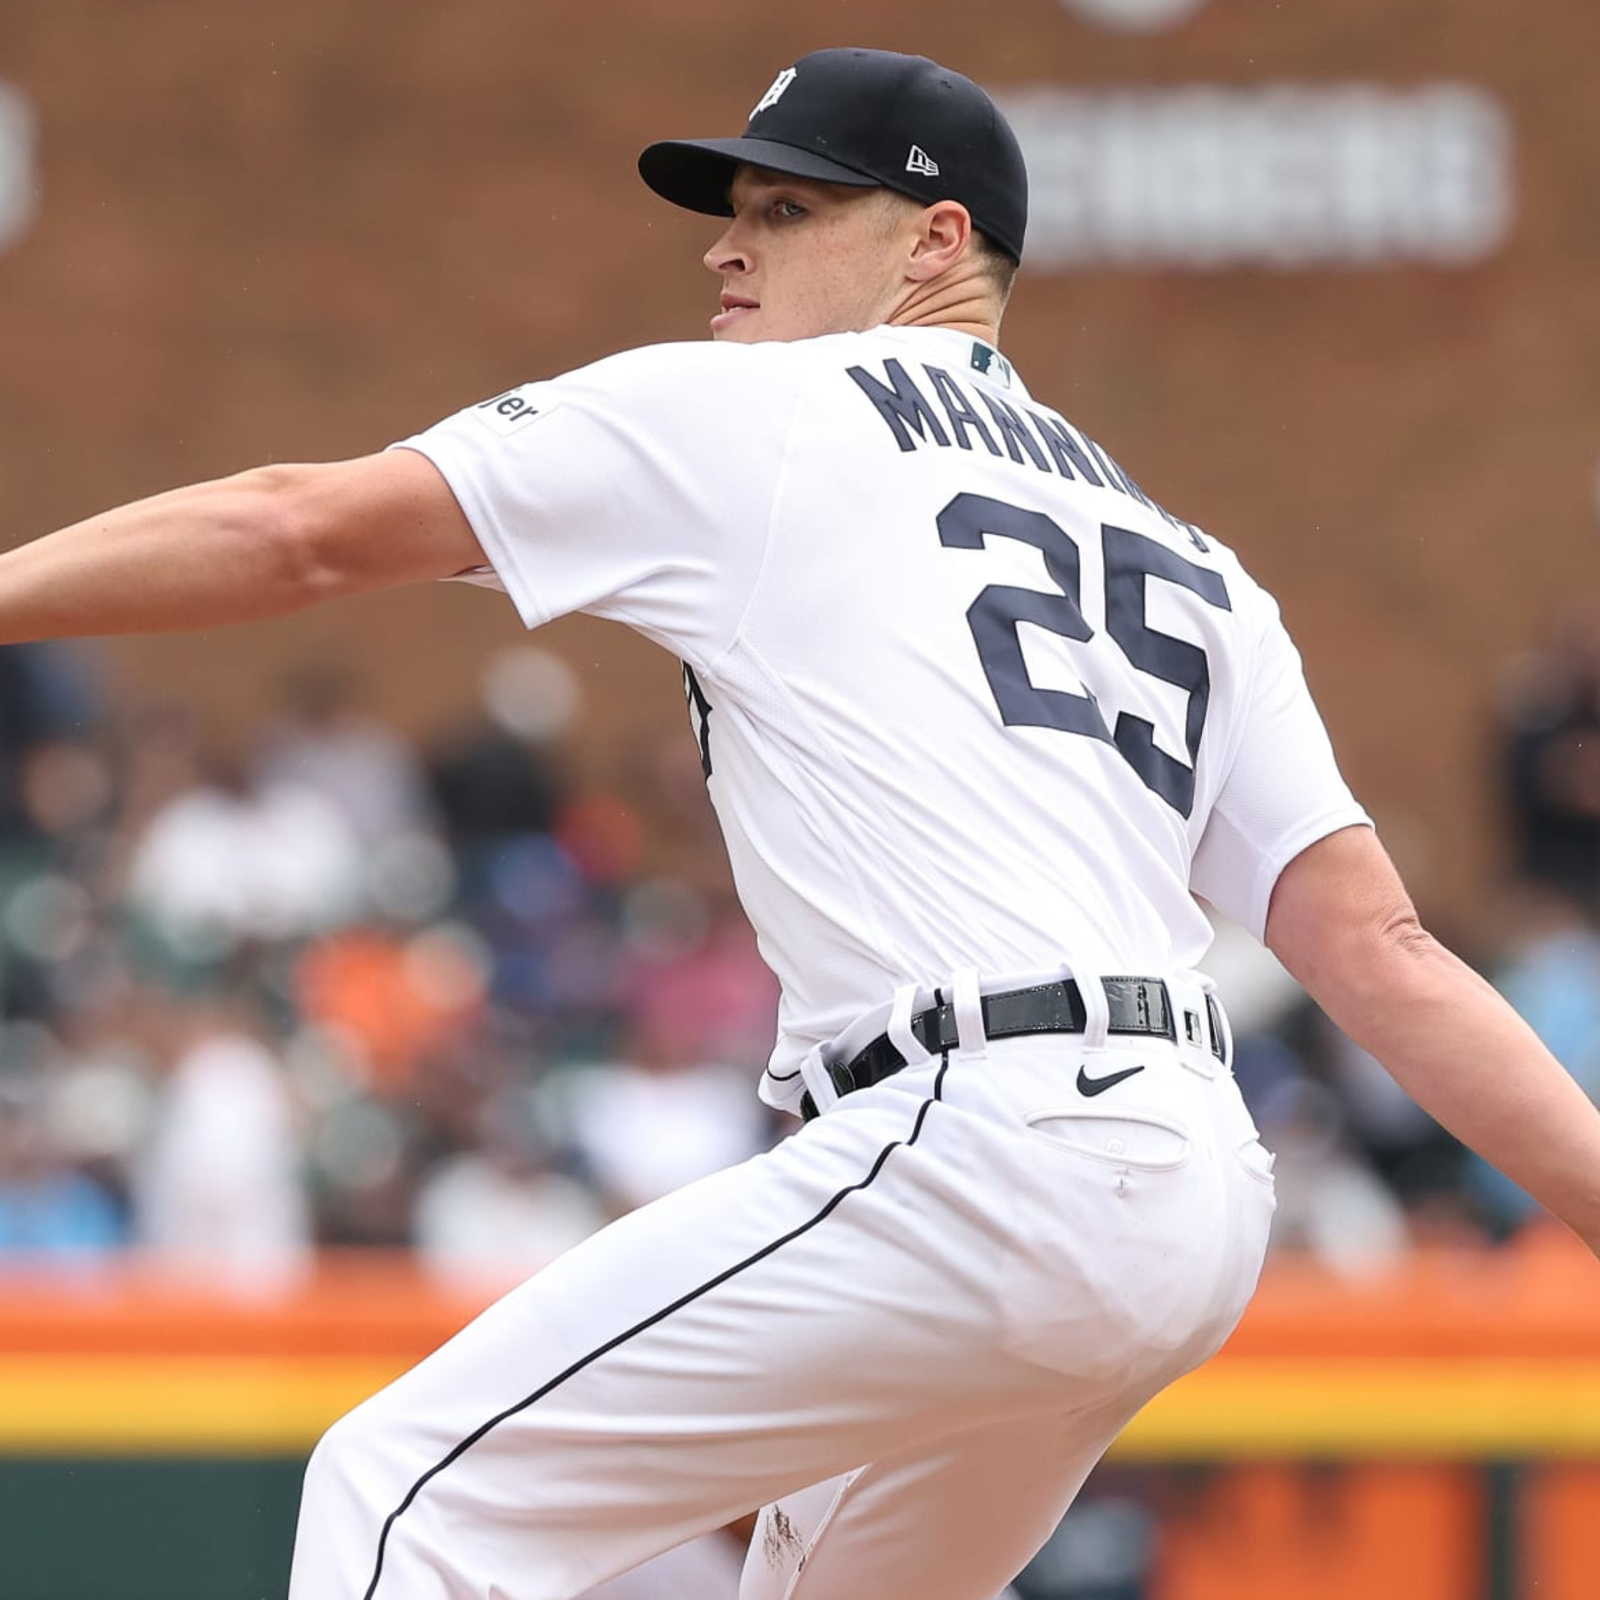 MLB on X: The Detr0it @Tigers have done it! A combined no-hitter